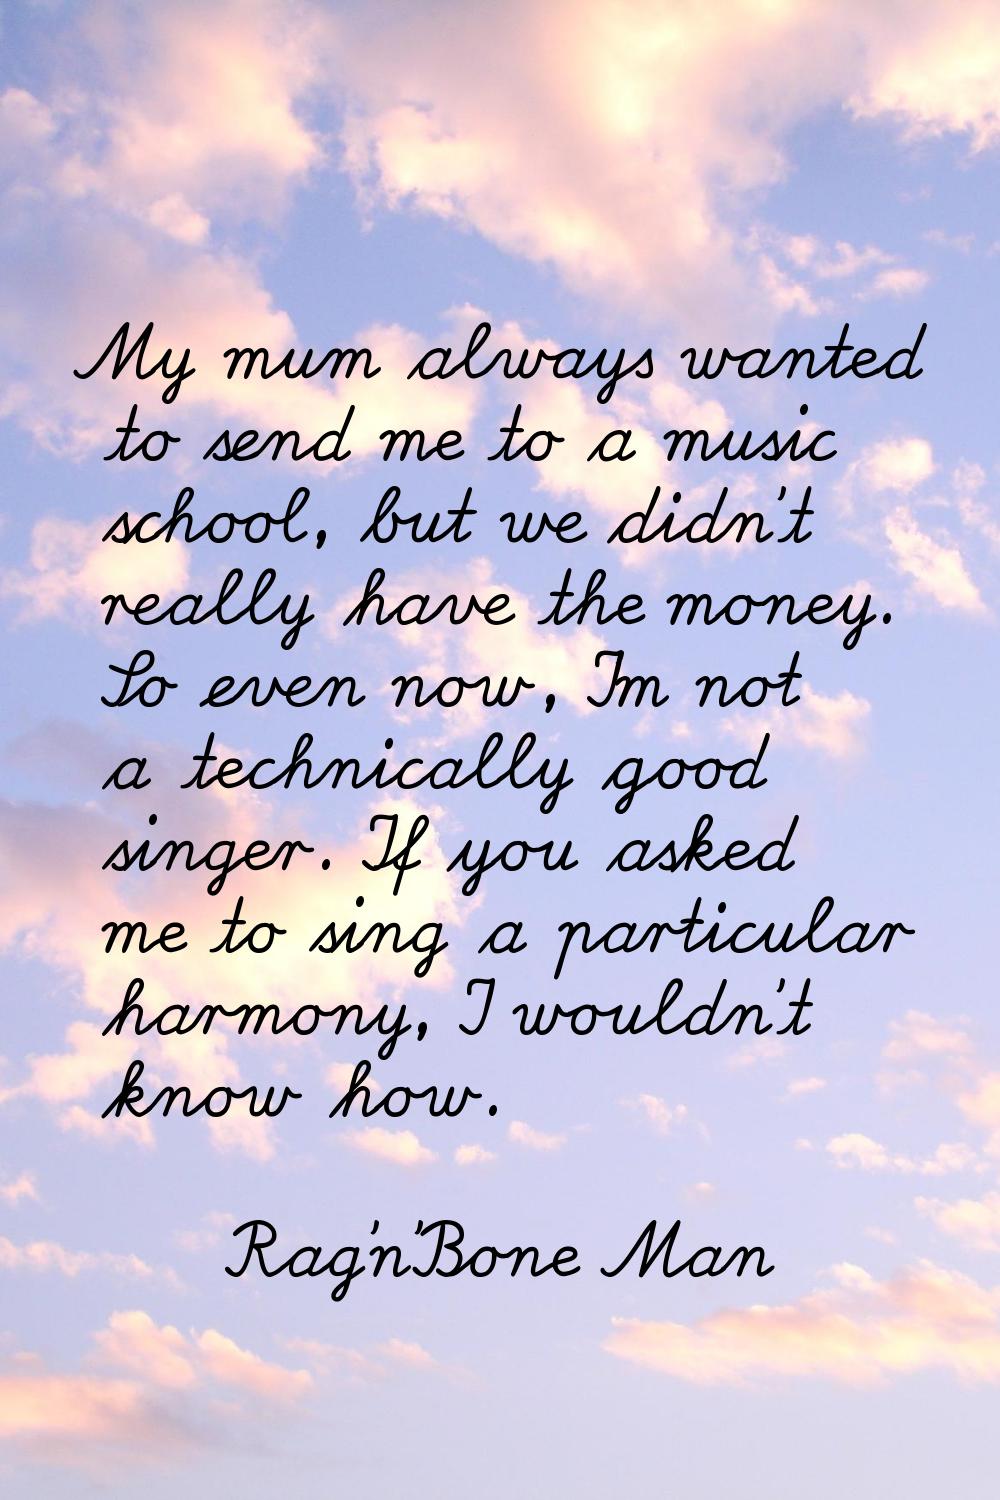 My mum always wanted to send me to a music school, but we didn't really have the money. So even now